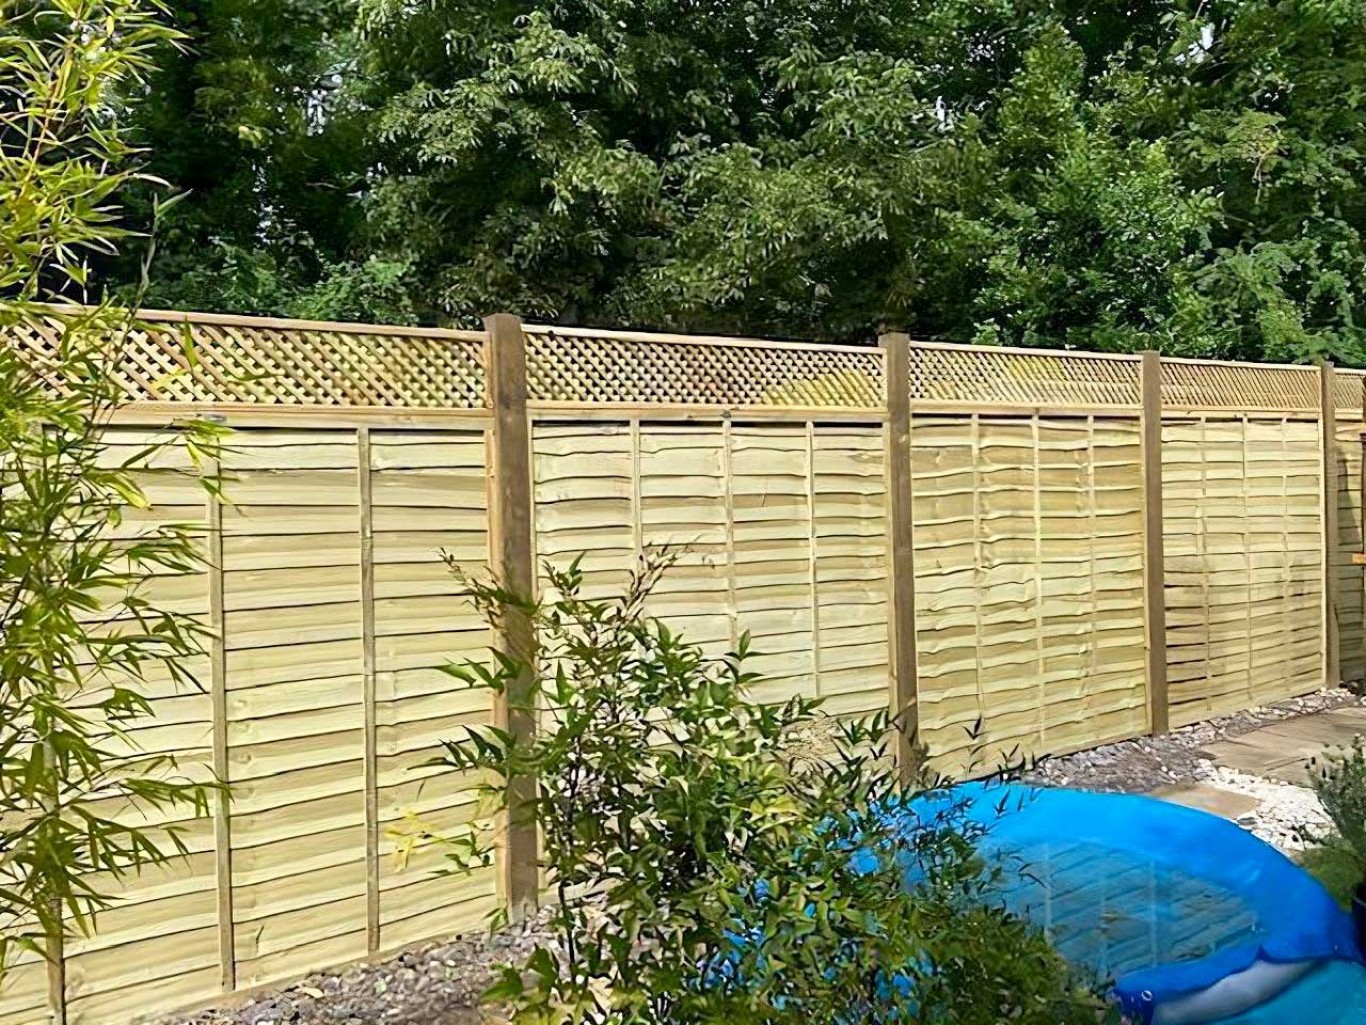 Larch lap panel fencing in garden with trees in the background.